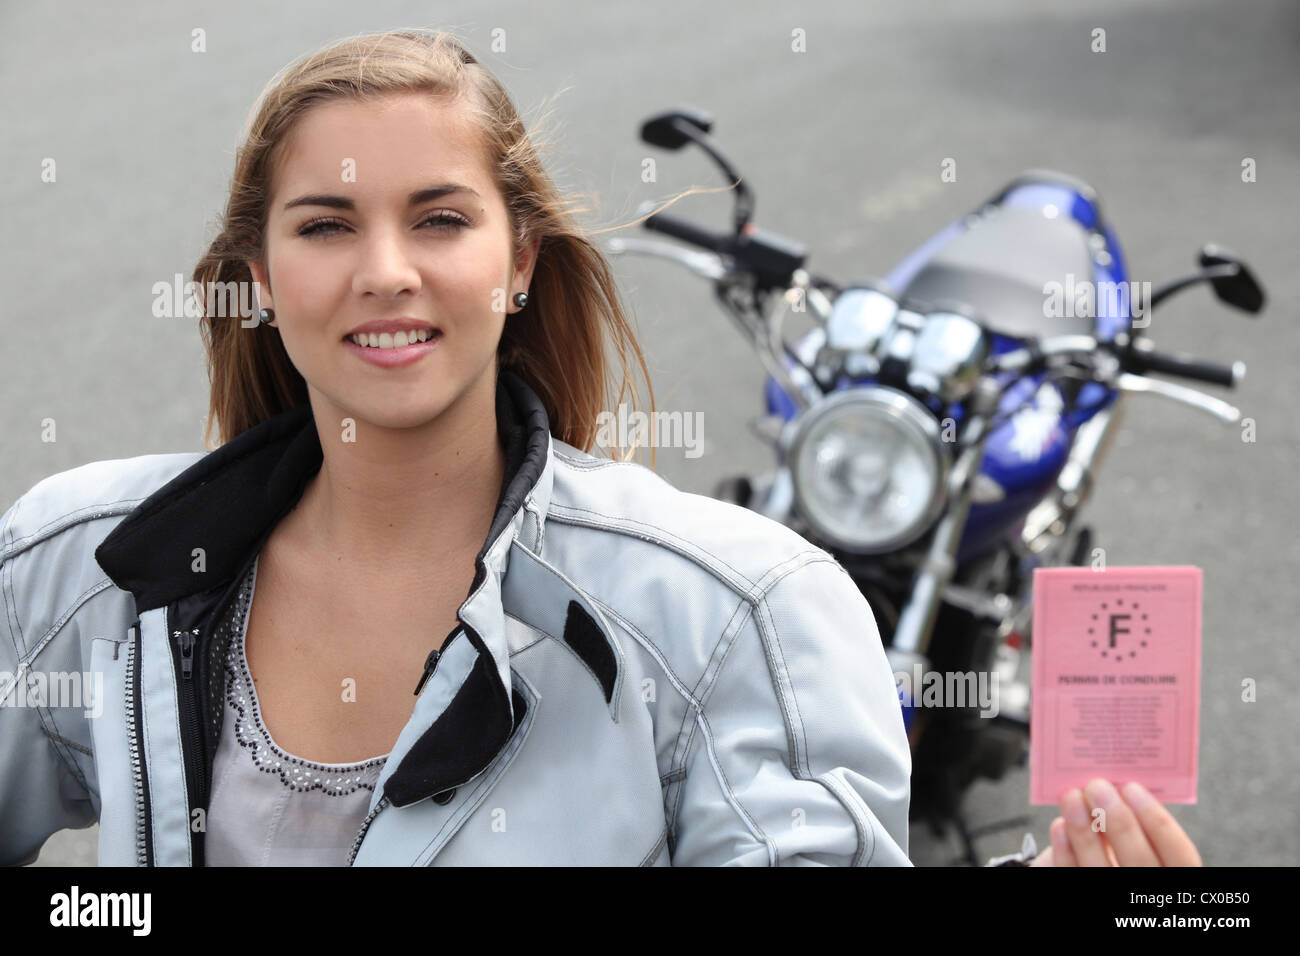 Woman with a motorbike and driver's license Stock Photo